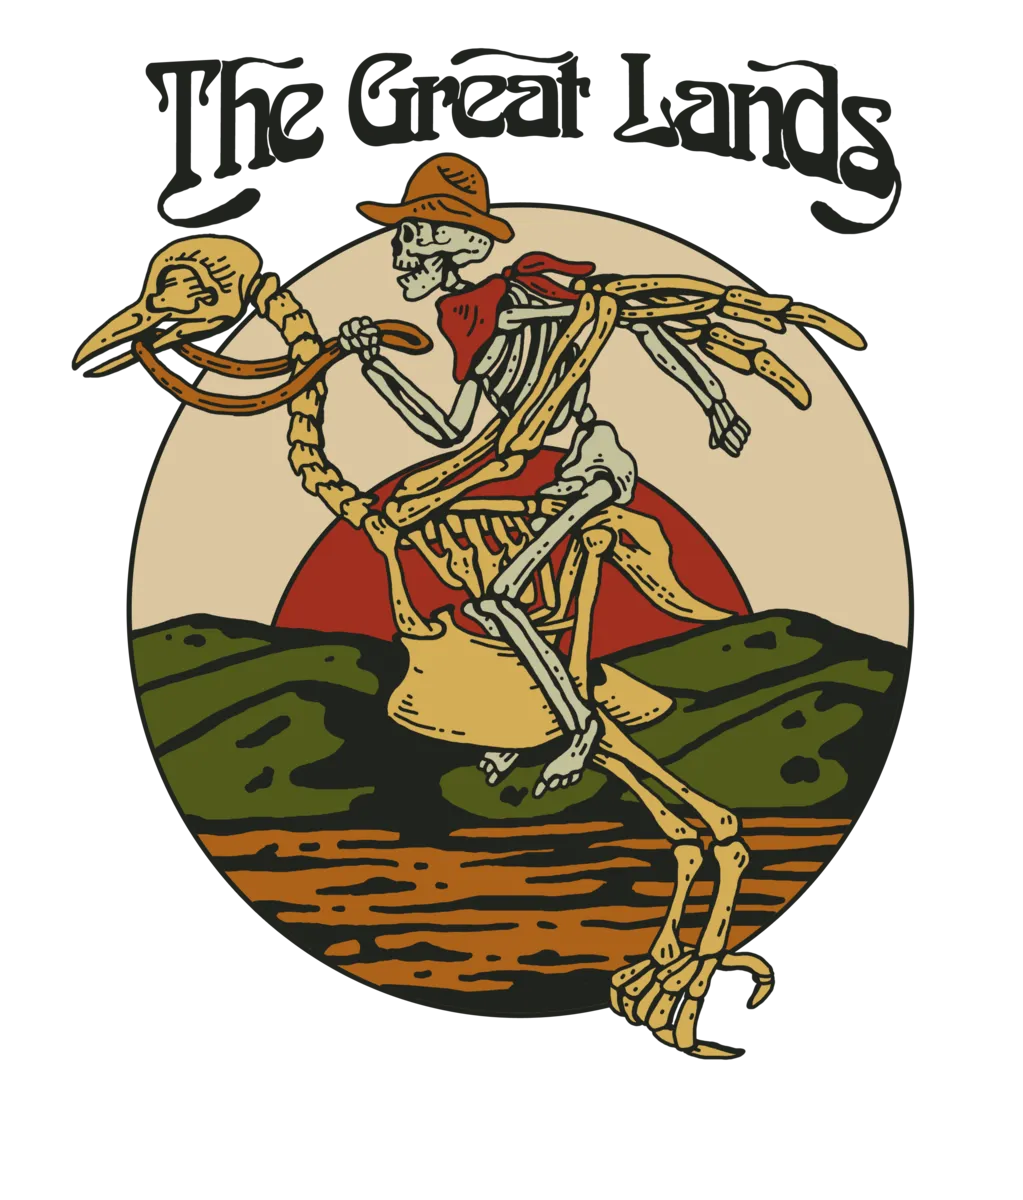 The Land Raisers - (Supporters of The Great Lands)